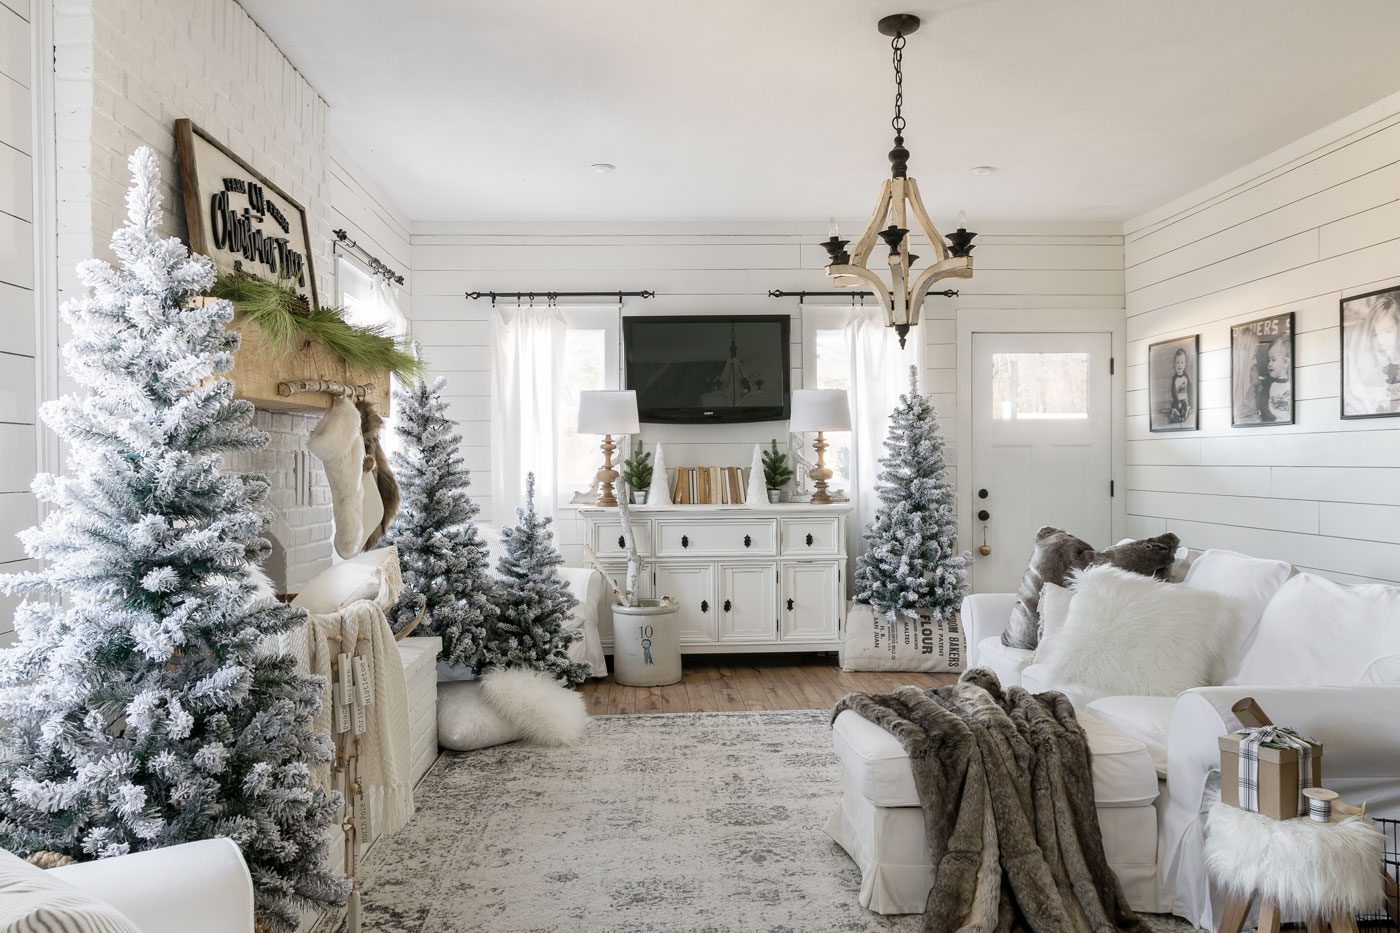 The white Christmas home living room decorated with several snow-crusted pine trees and many pillows and blankets in a neutral color scheme.